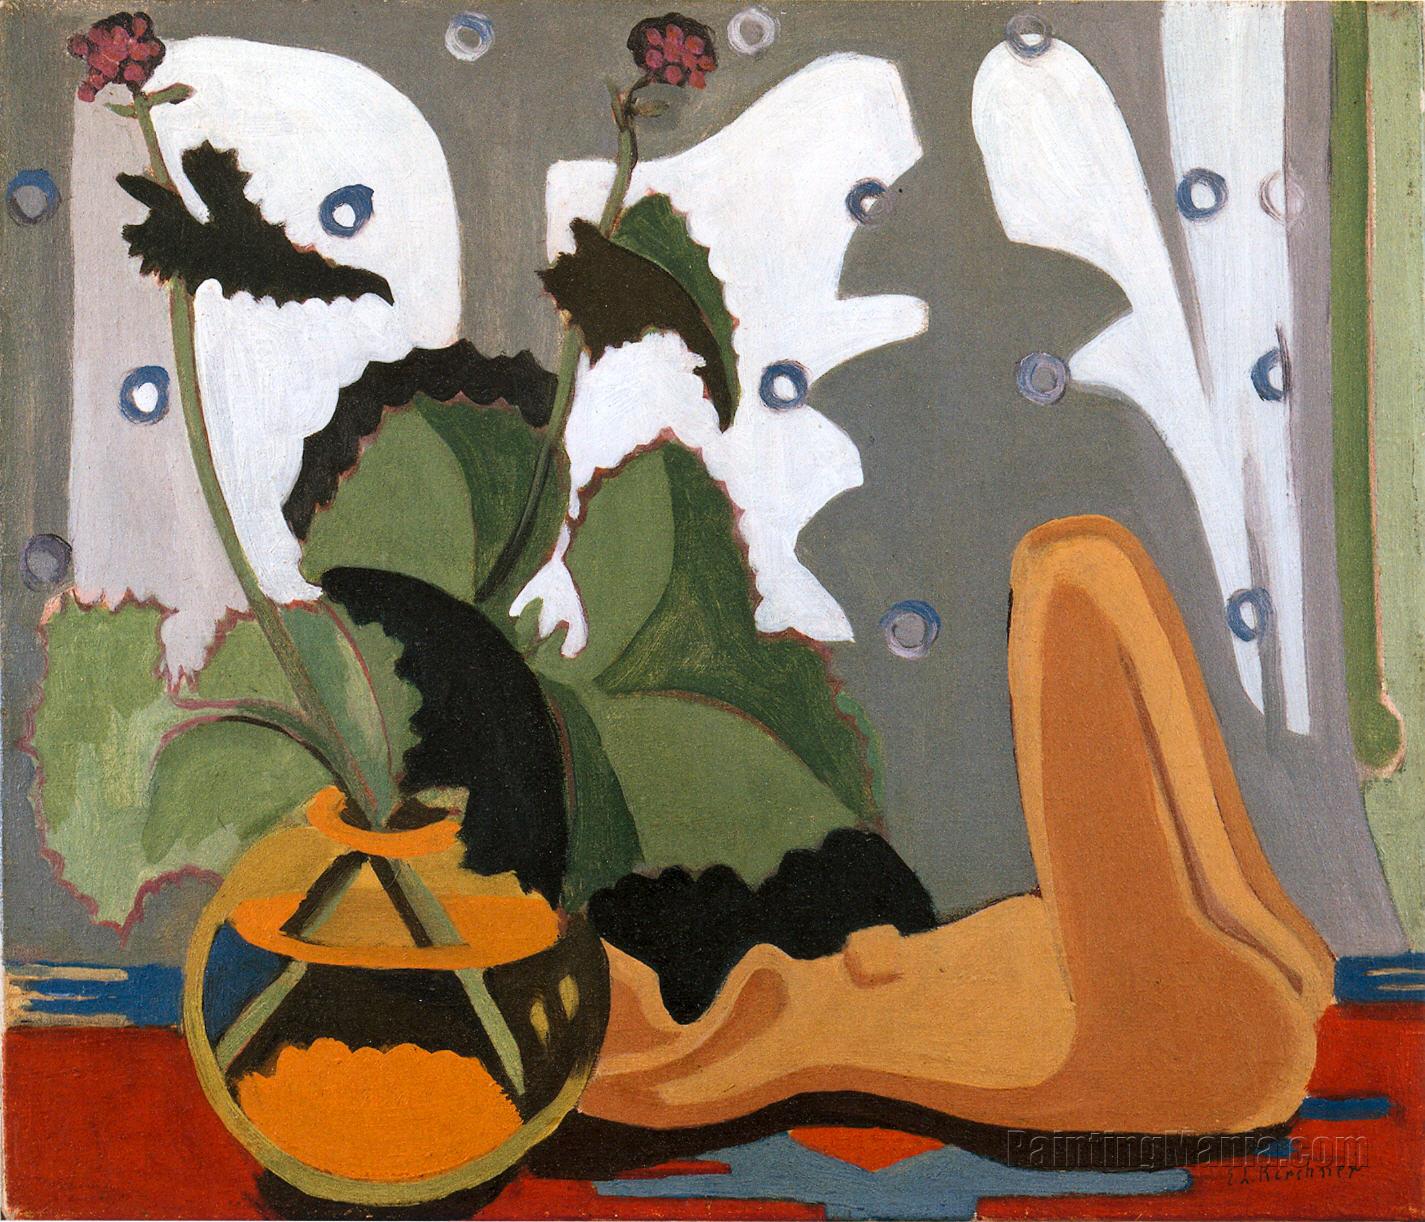 Stil-life with Sculpture in Front of a Window